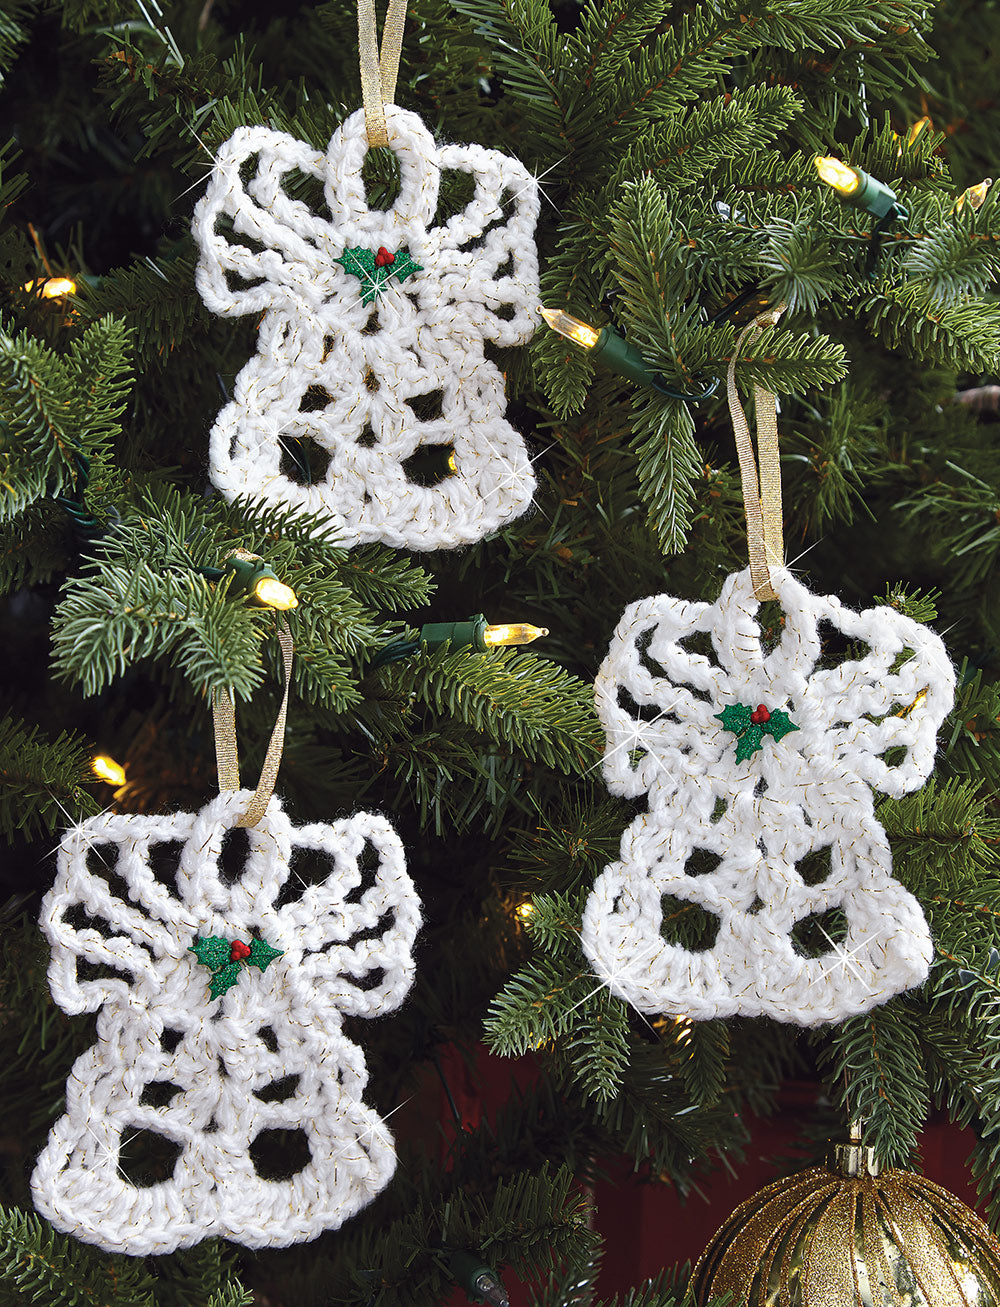 Sparkly Angels Crocheted Ornaments